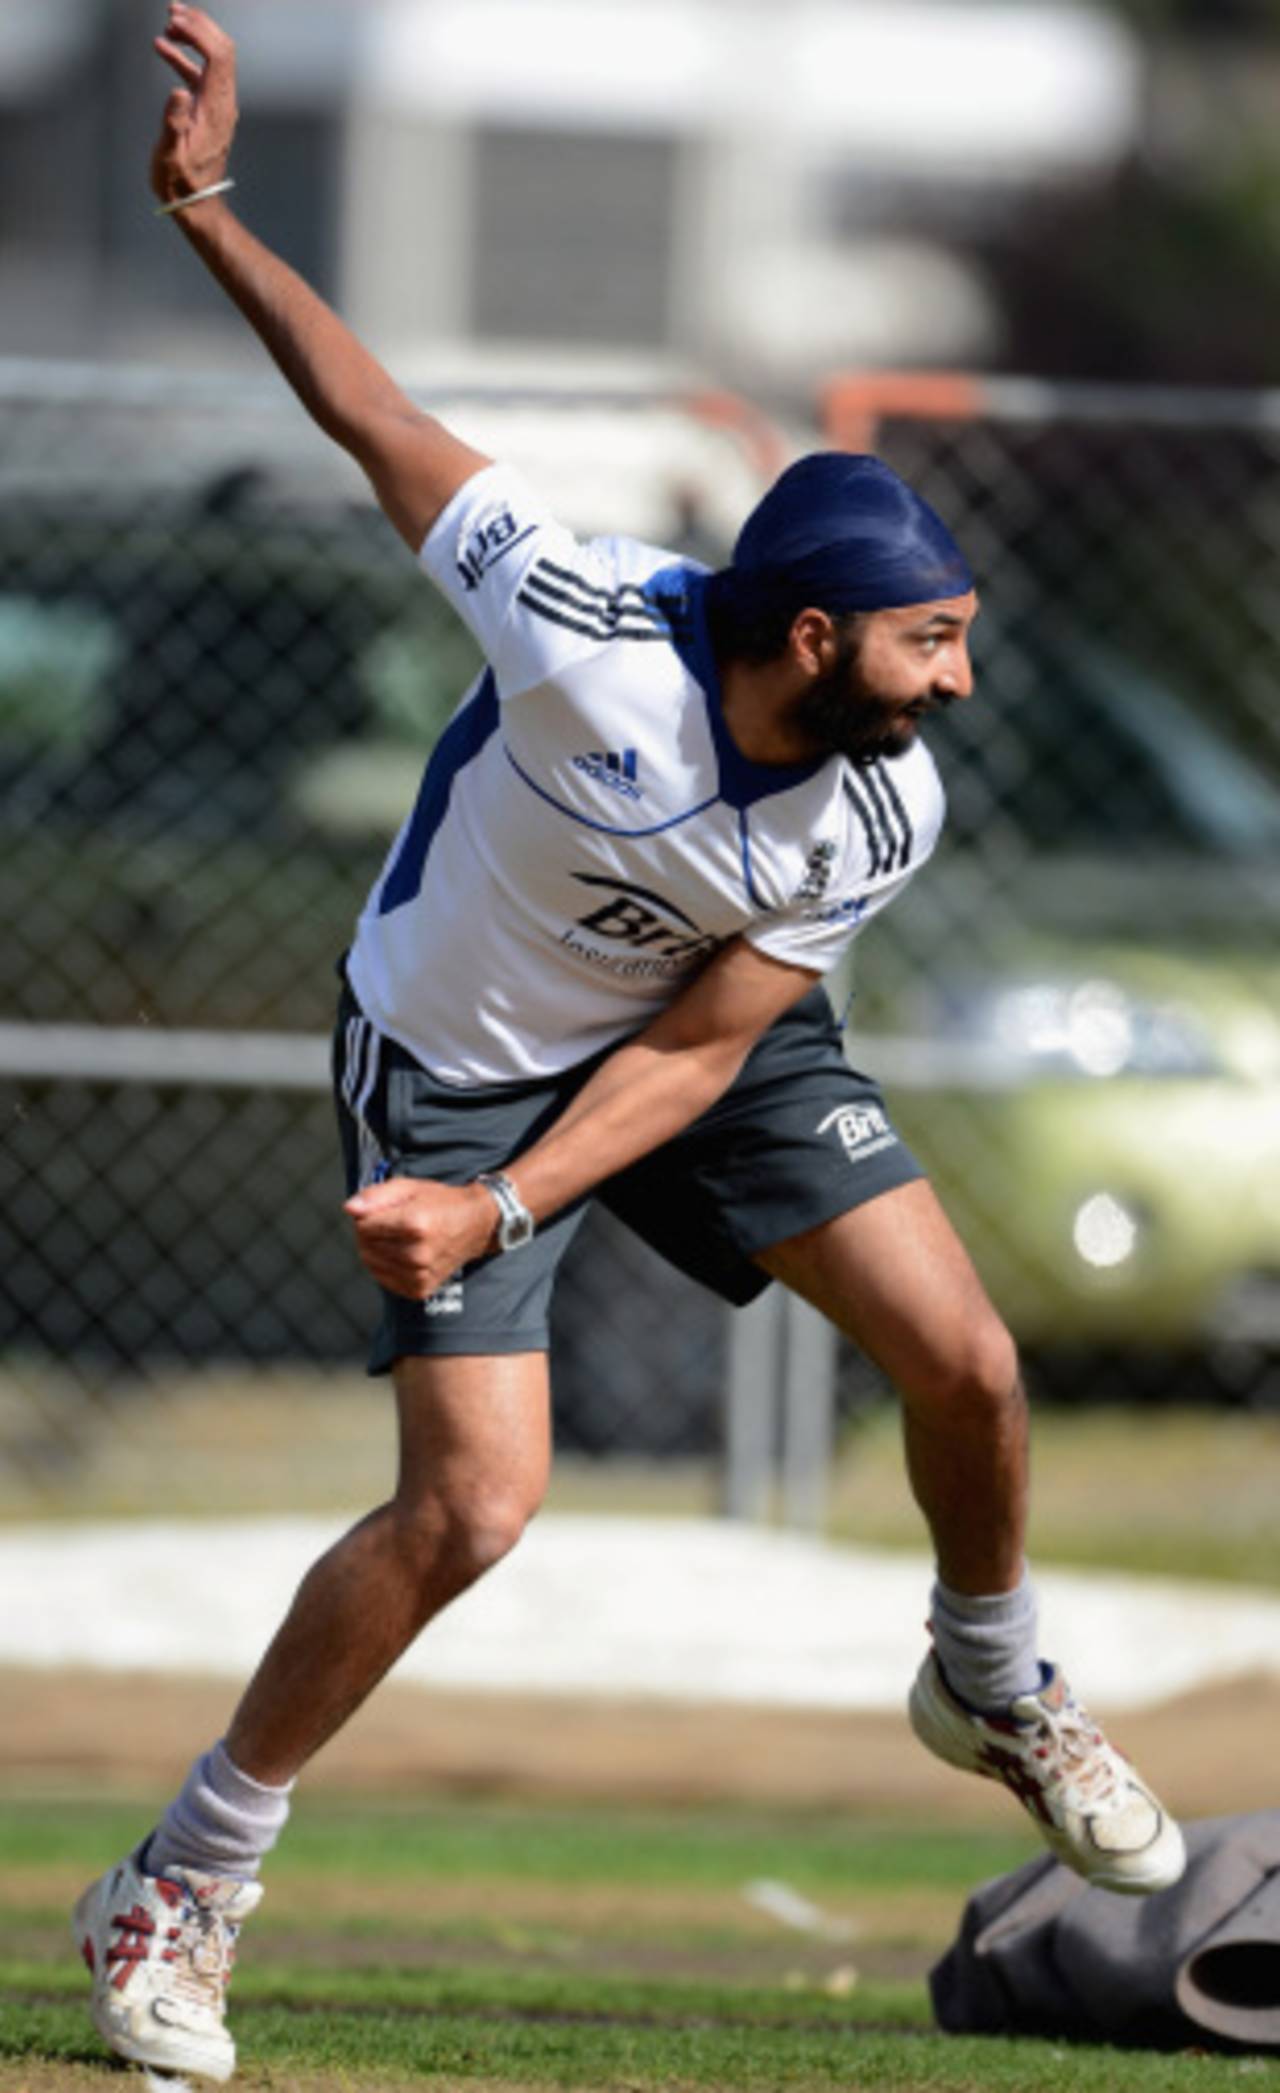 Monty Panesar isn't a naturally confident individual, but he should be persisted with&nbsp;&nbsp;&bull;&nbsp;&nbsp;Getty Images